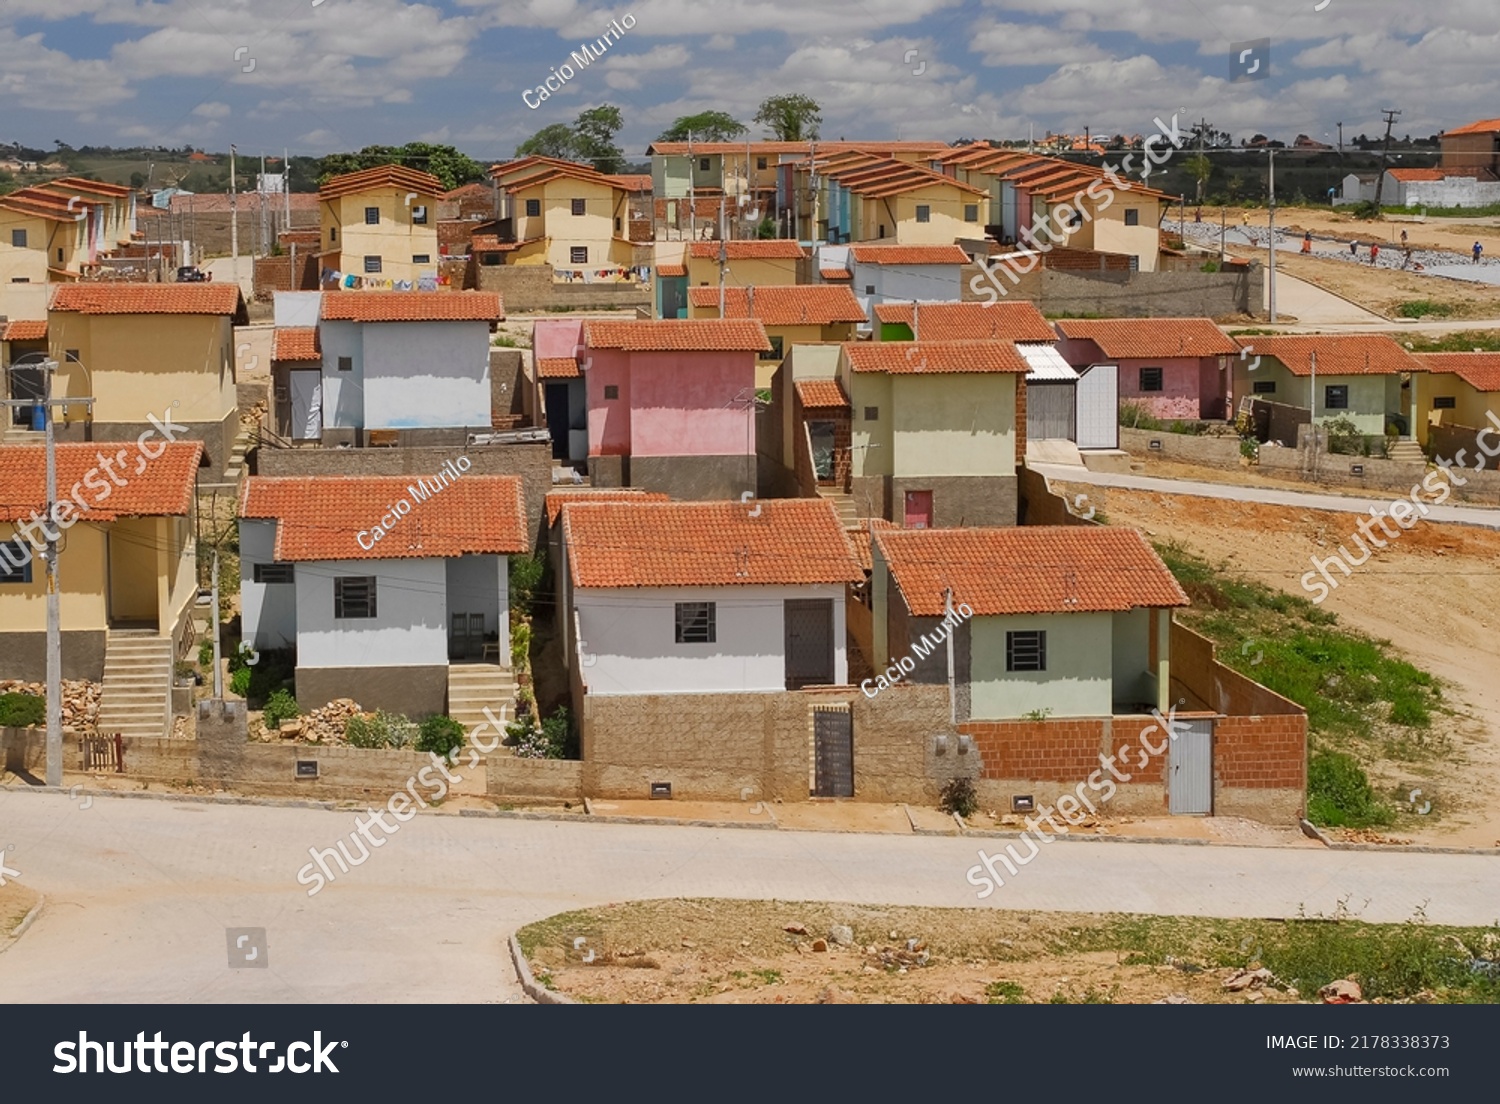 Popular houses built by the Brazilian government for low-income population. Housing. #2178338373